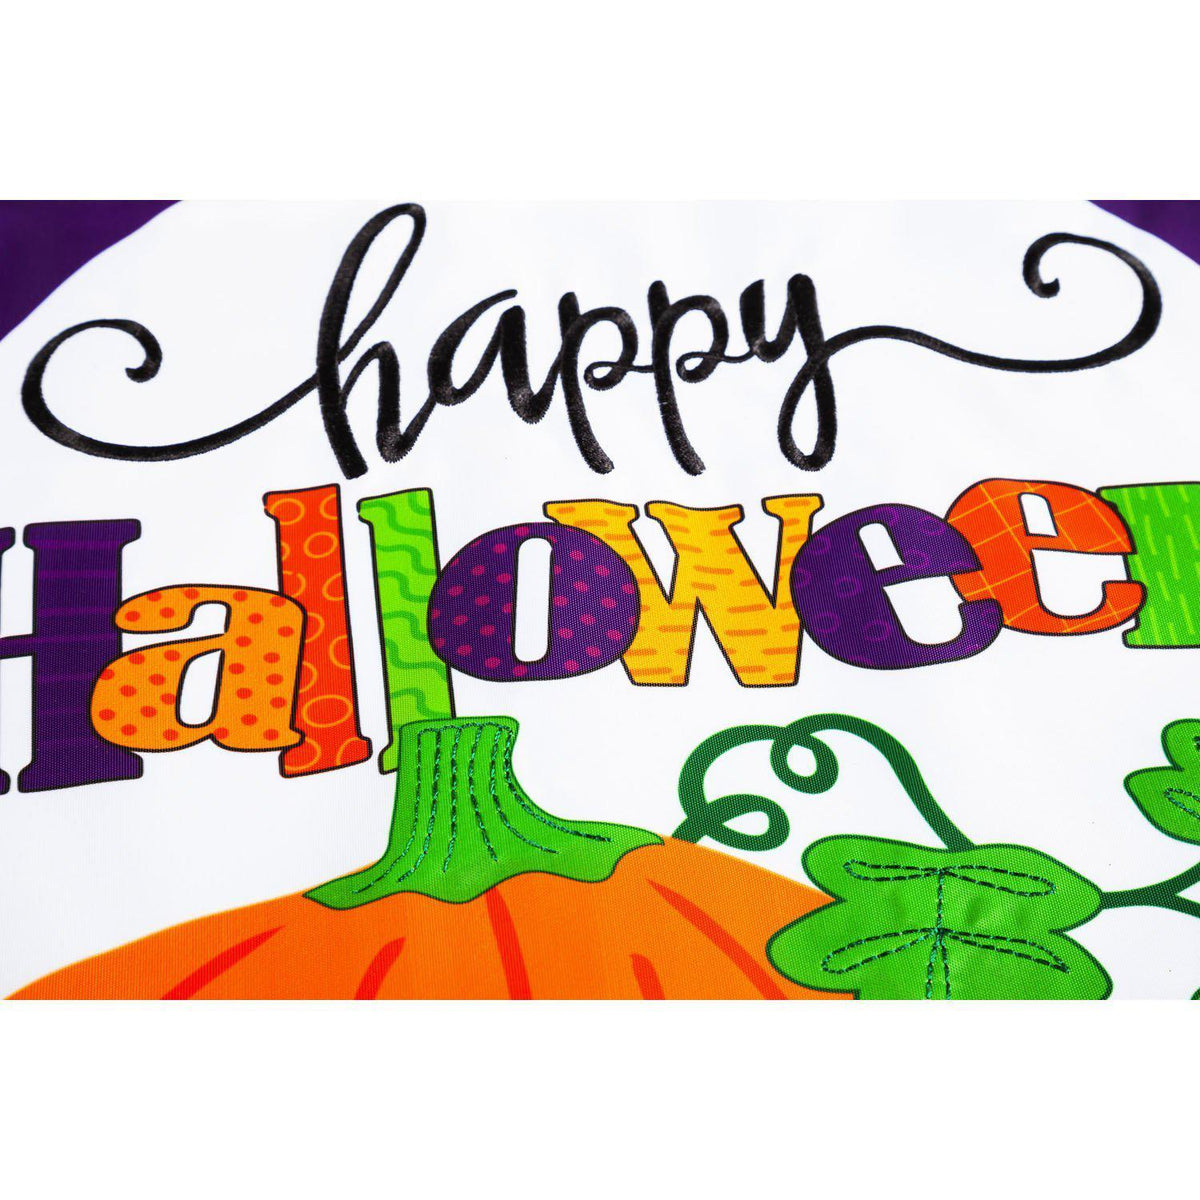 The Halloween Jack-O-Lanterns garden flag features two jolly jack-o-lanterns and the words "Happy Halloween".